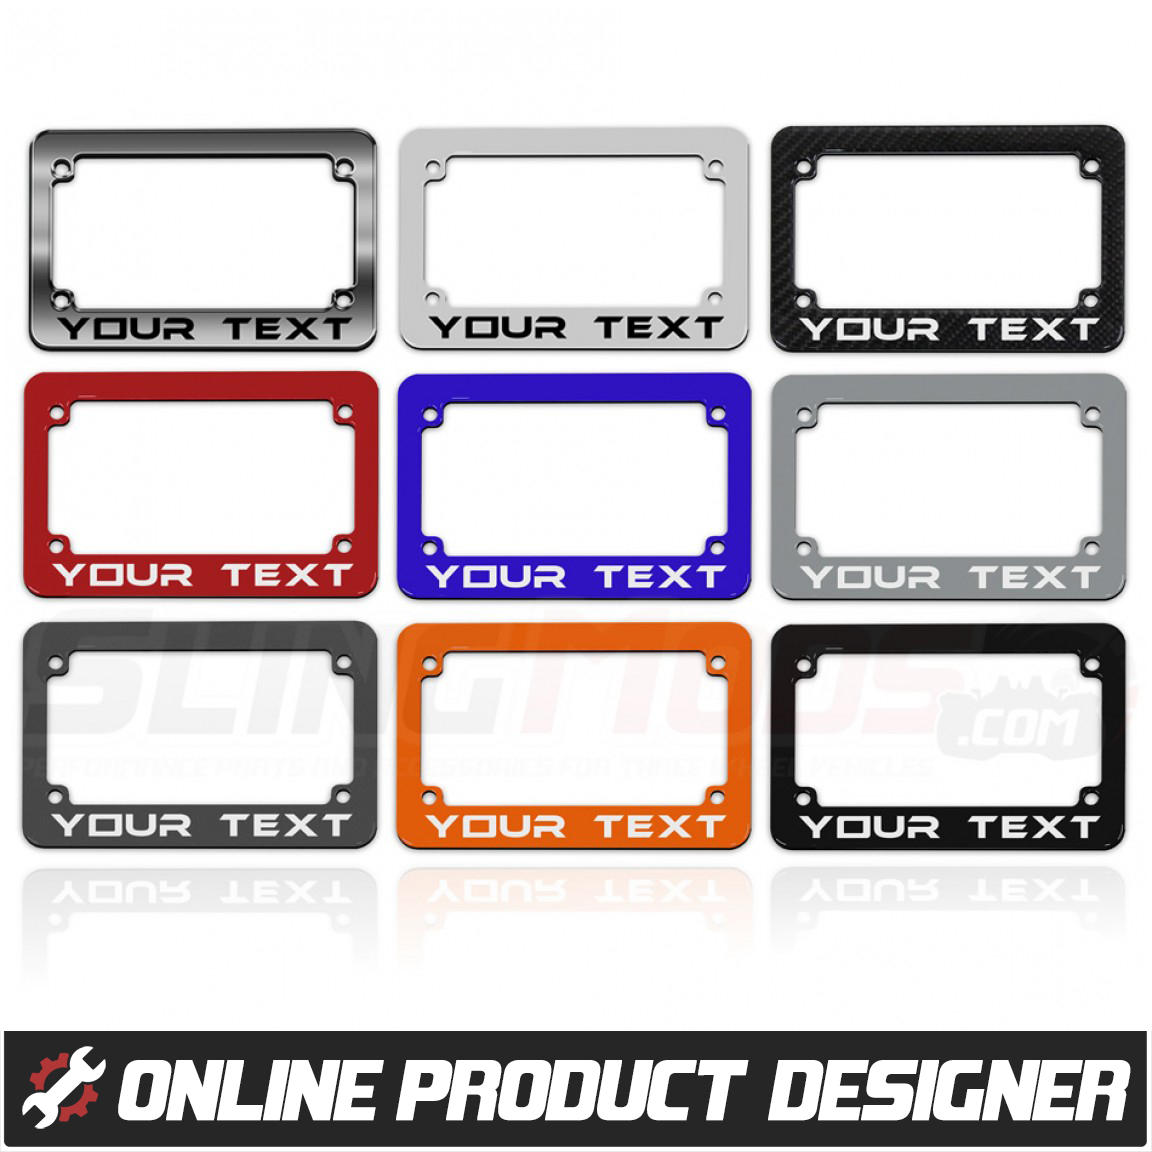 2 CUSTOM PERSONALIZED WHITE WITH ORANGE LETTERS customized License Plate Frame